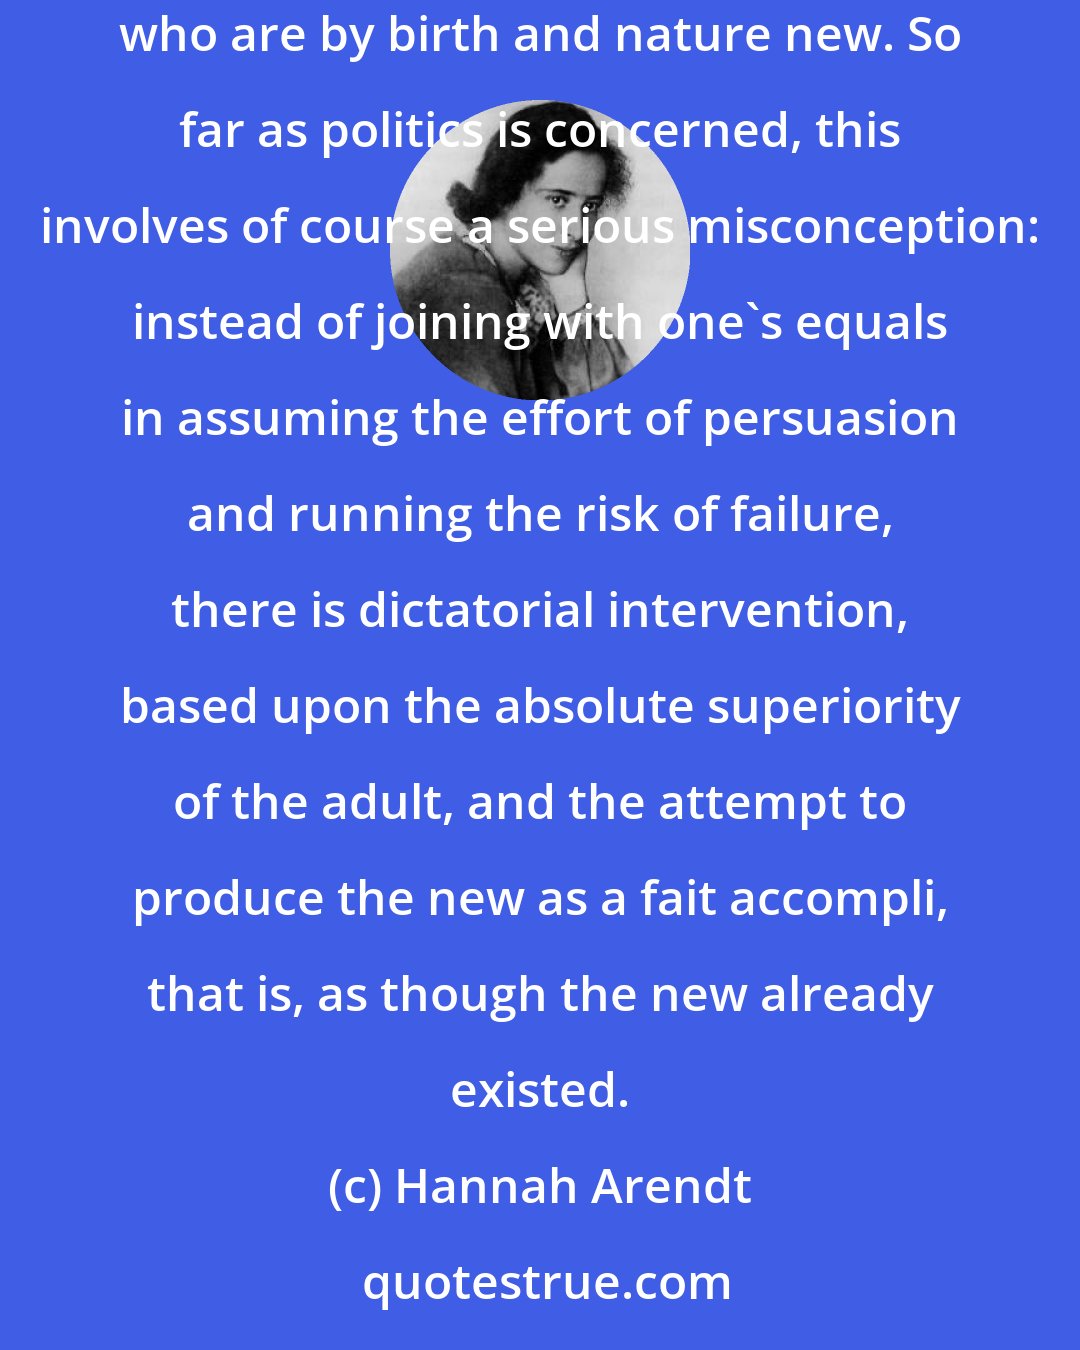 Hannah Arendt: The role played by education in all political utopias from ancient times onward shows how natural it seems to start a new world with those who are by birth and nature new. So far as politics is concerned, this involves of course a serious misconception: instead of joining with one's equals in assuming the effort of persuasion and running the risk of failure, there is dictatorial intervention, based upon the absolute superiority of the adult, and the attempt to produce the new as a fait accompli, that is, as though the new already existed.